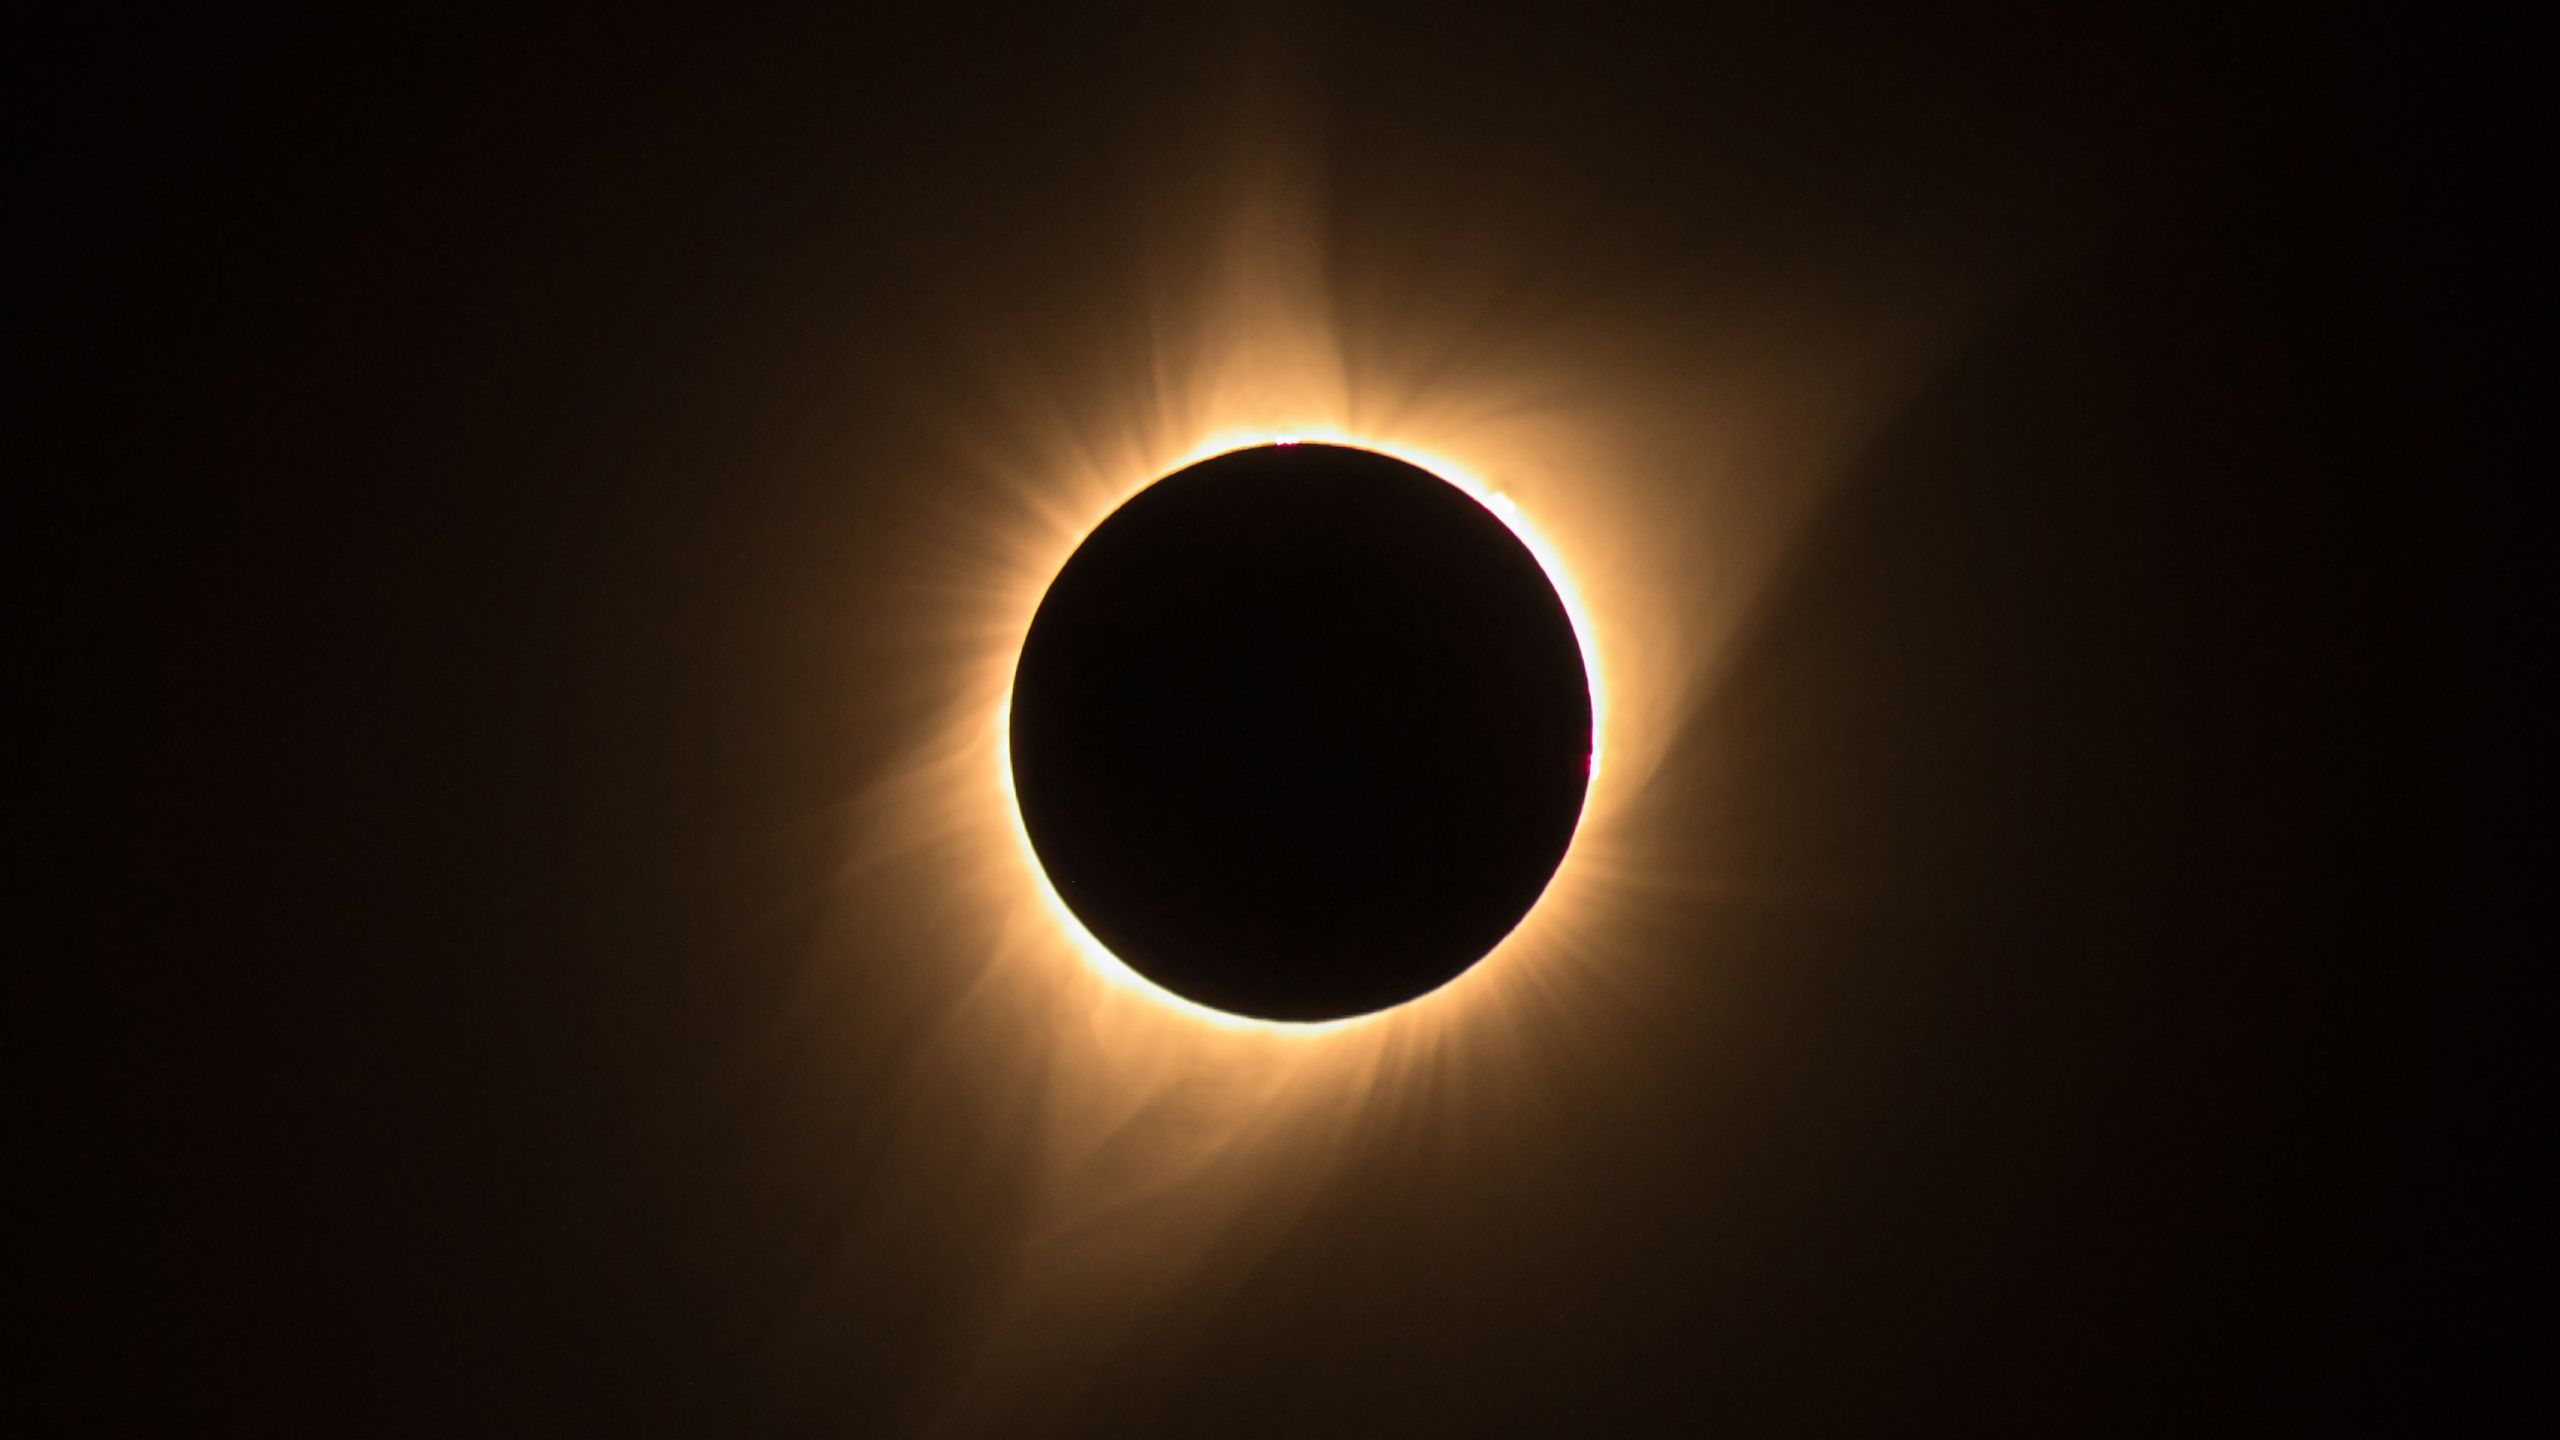 How to safely photograph the solar eclipse